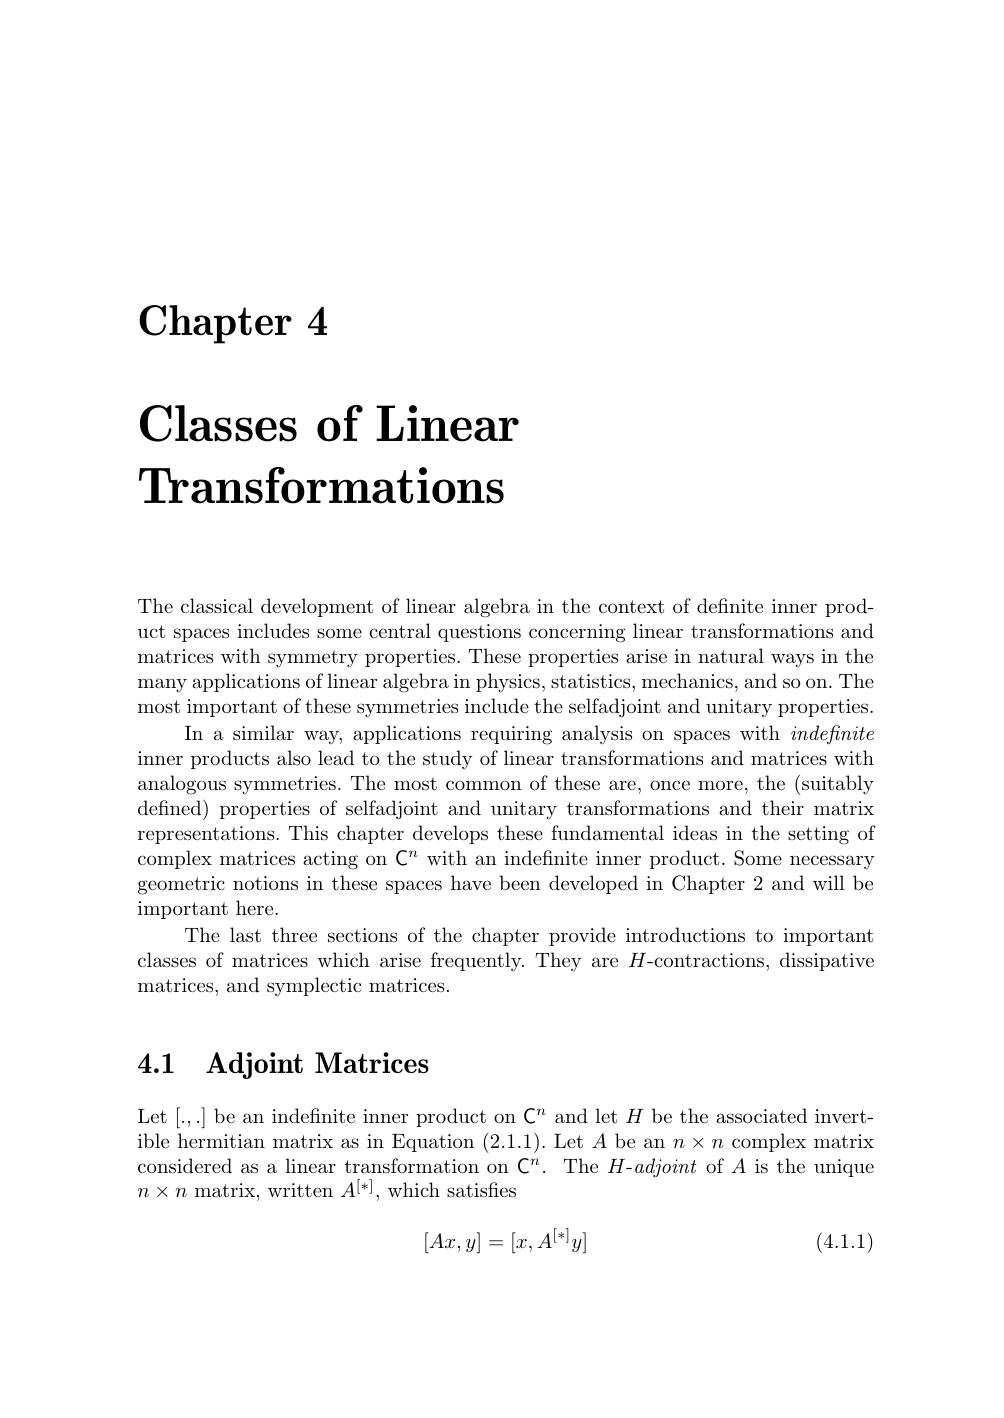 Classes of Linear Transformations by Unknown